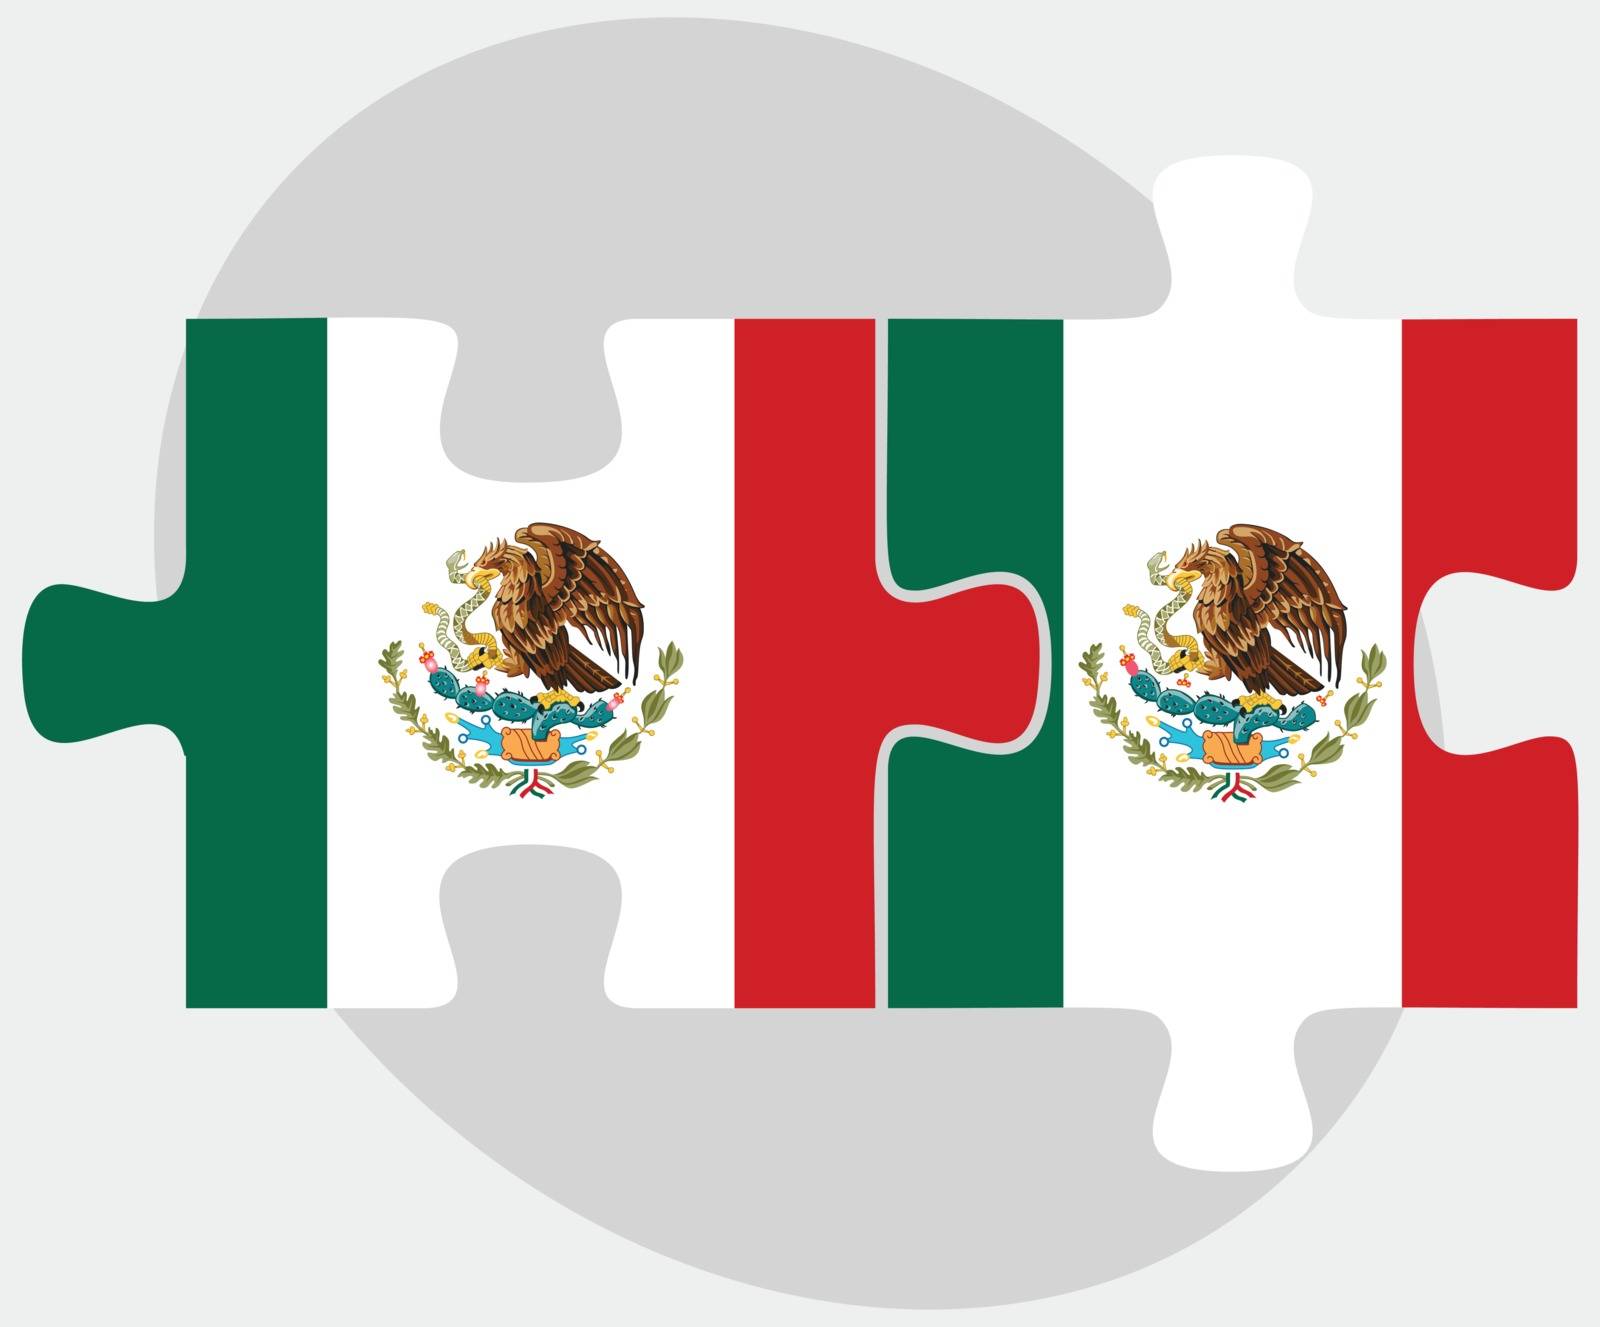 Vector Image - Mexico and Mexico Flags in puzzle isolated on white background

